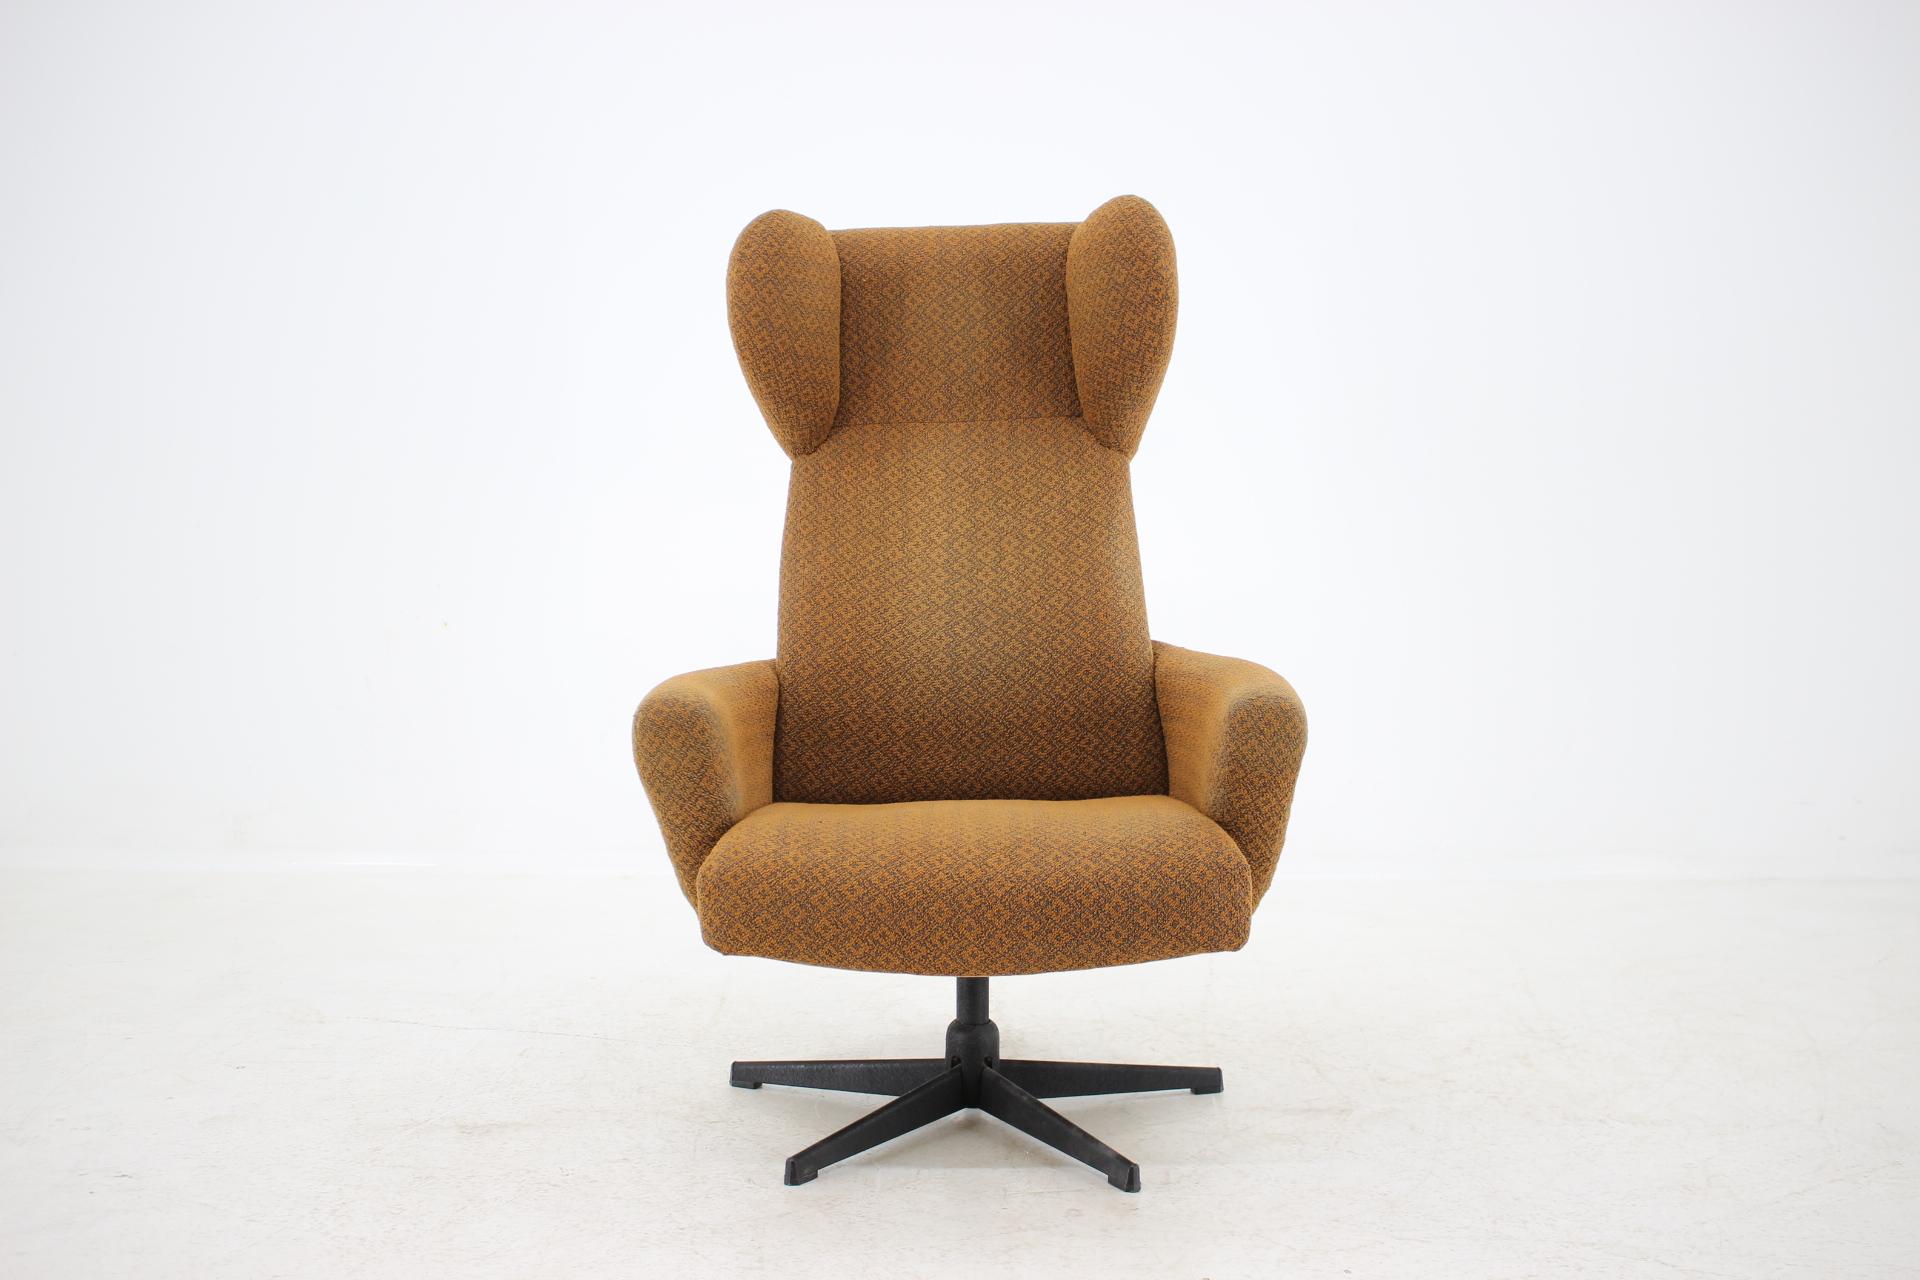 - Made in Czechoslovakia
- Made of metal, fabric
- Upholstery is in original condition
- Good, original condition.